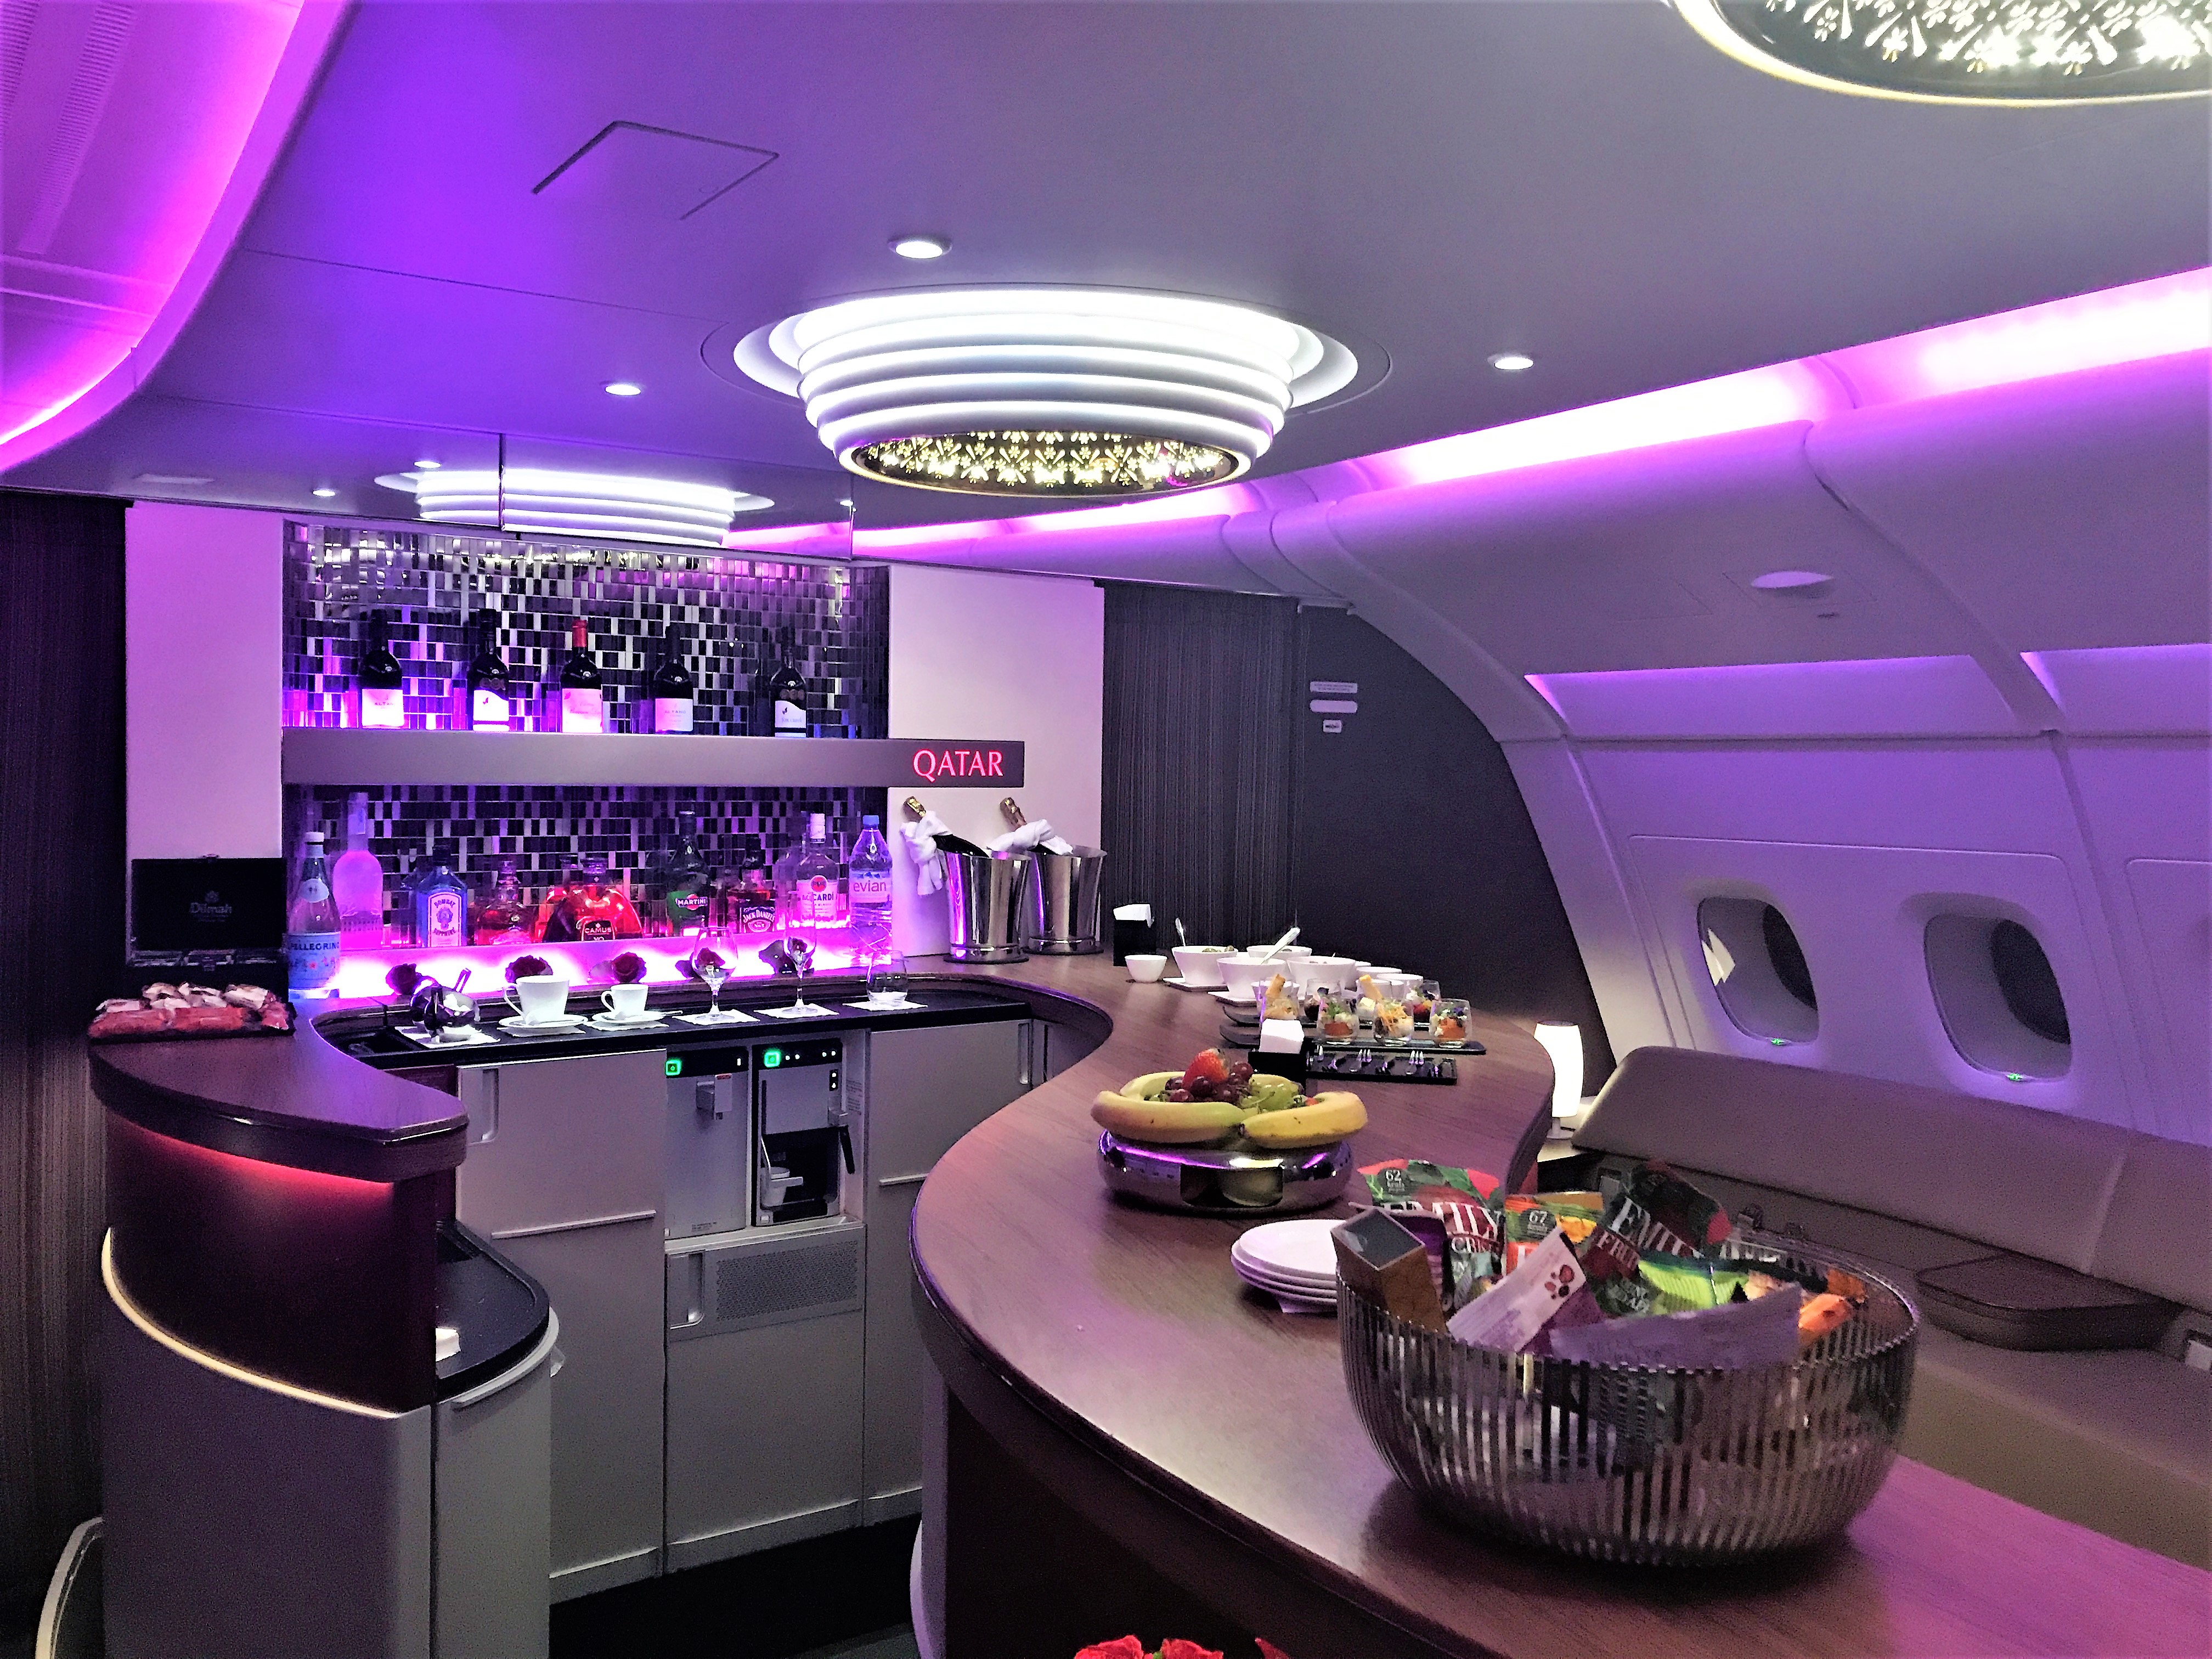 Qatar A380 business class & bar review in 360° - London to Doha